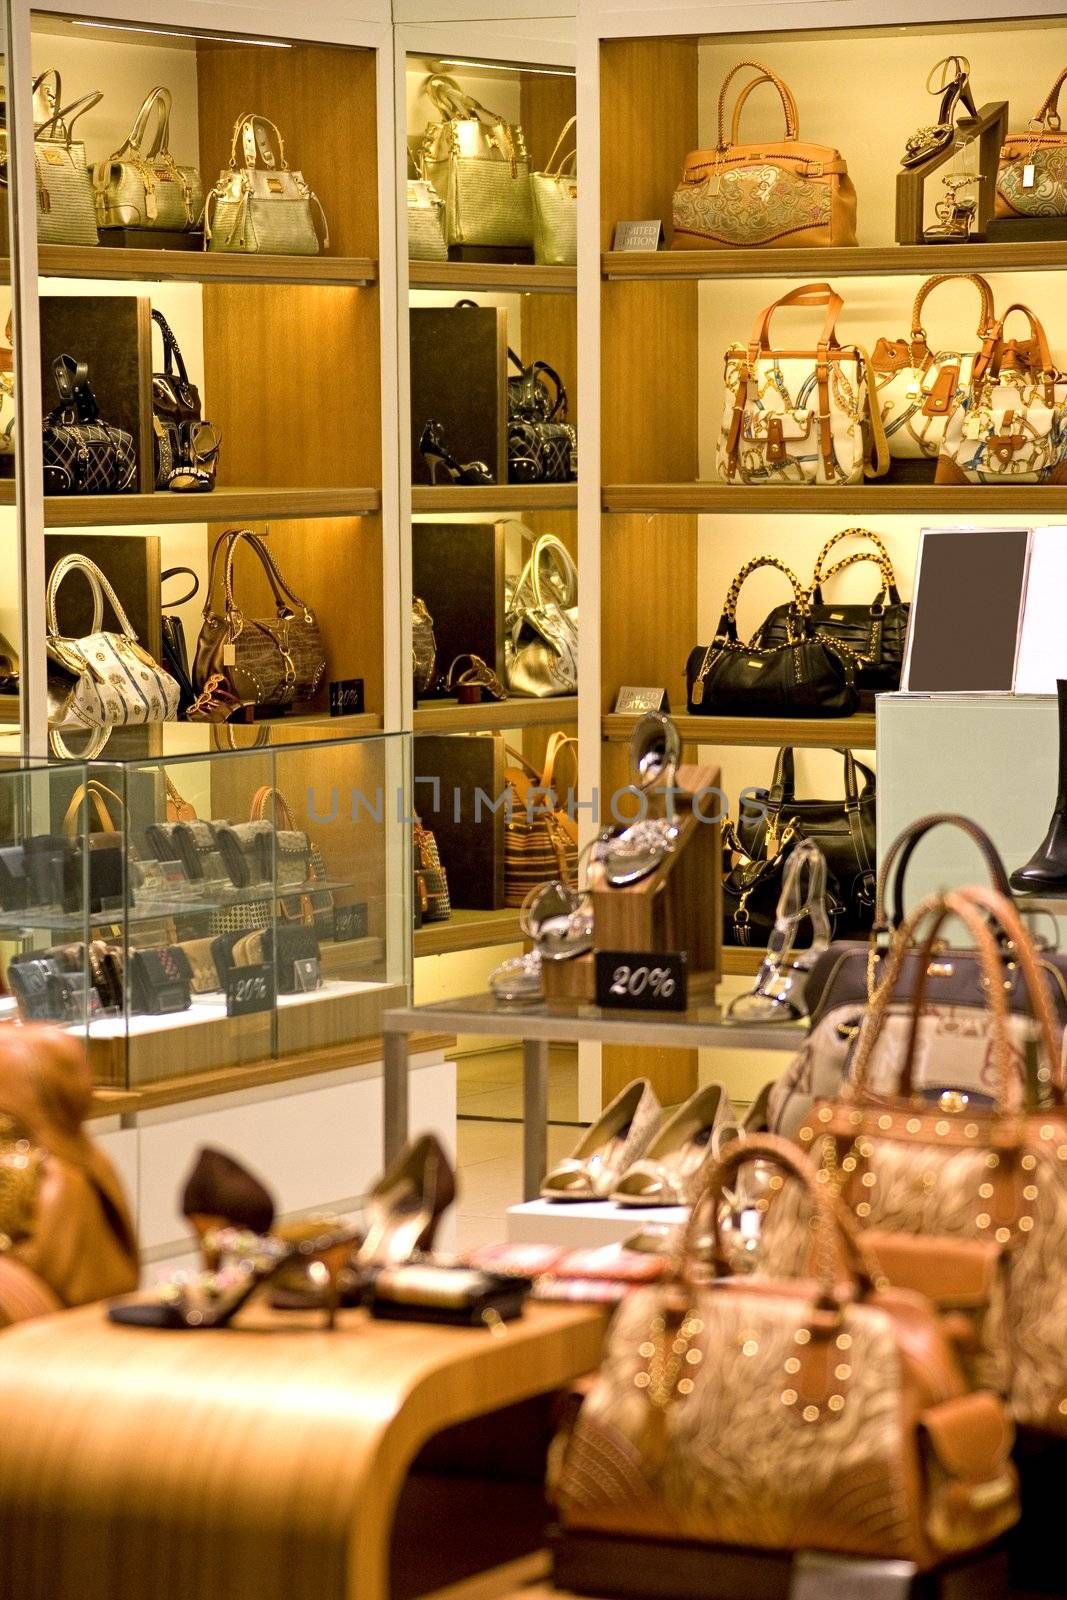 Image of a shop selling handbags and shoes in Malaysia.